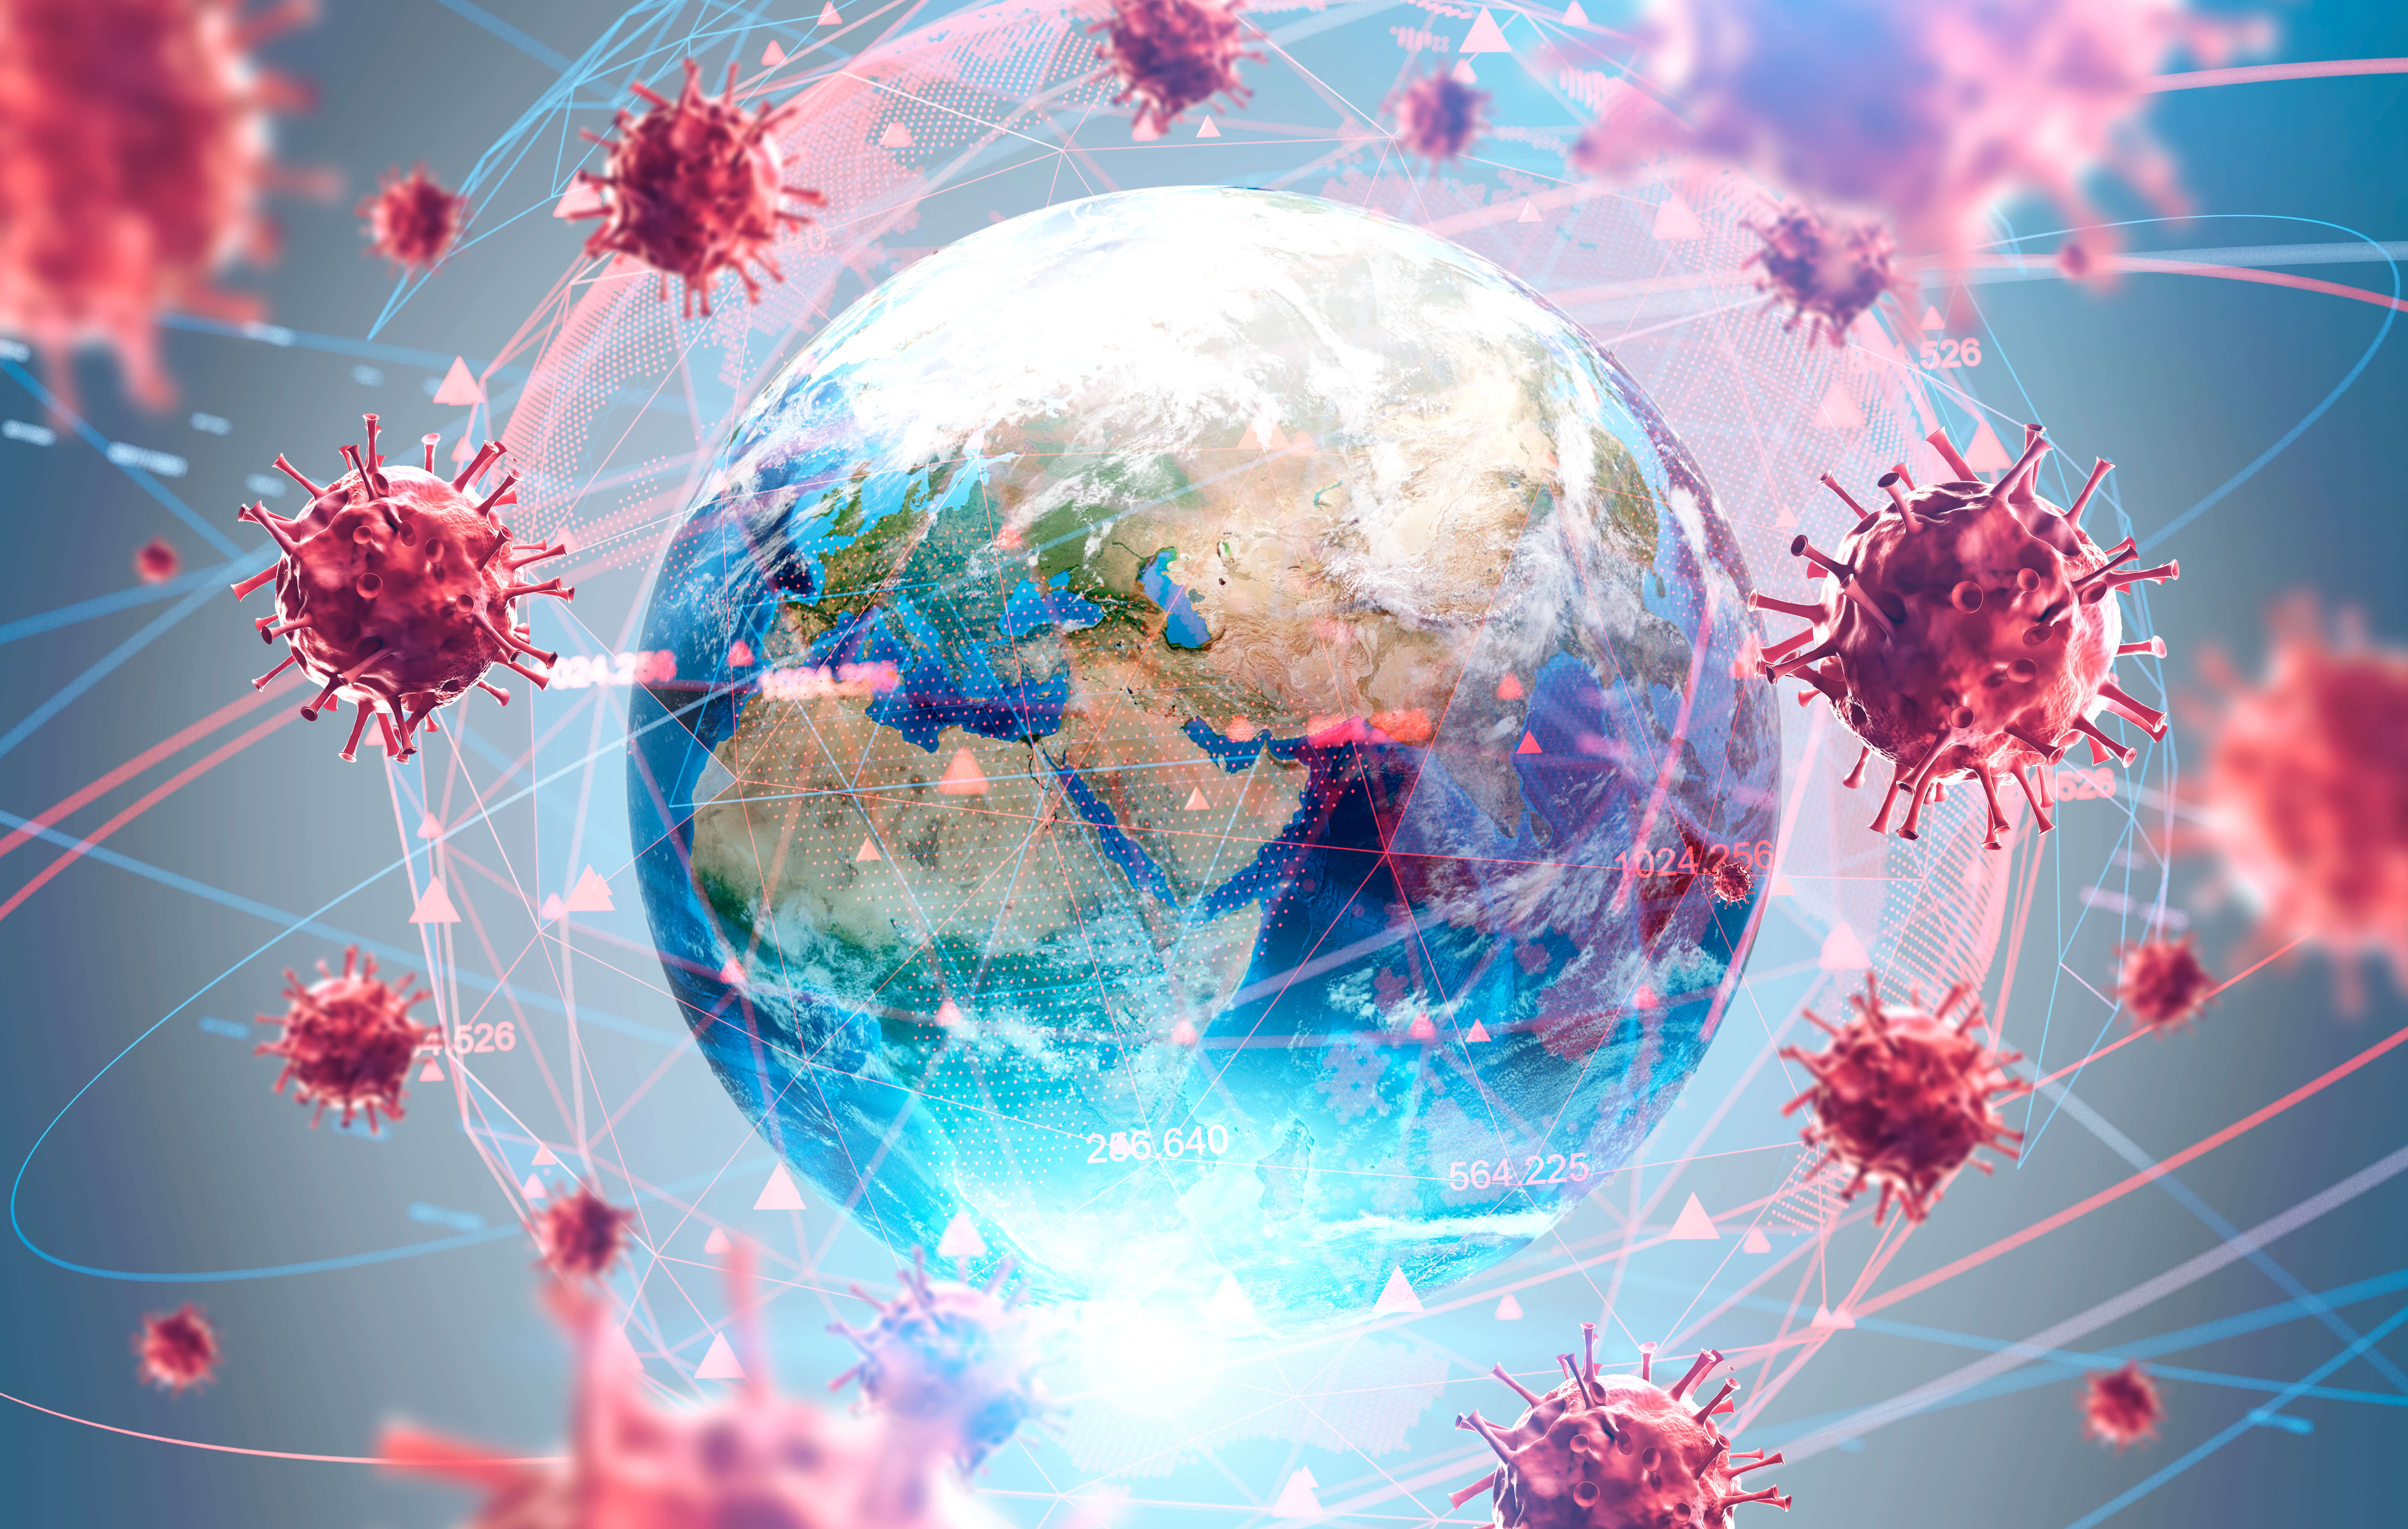 FinanceBrokerage - Economic News: Coronavirus almost becoming a global pandemic as it spreads across the world from Asia to Europe, the Middle East, and parts of the U.S